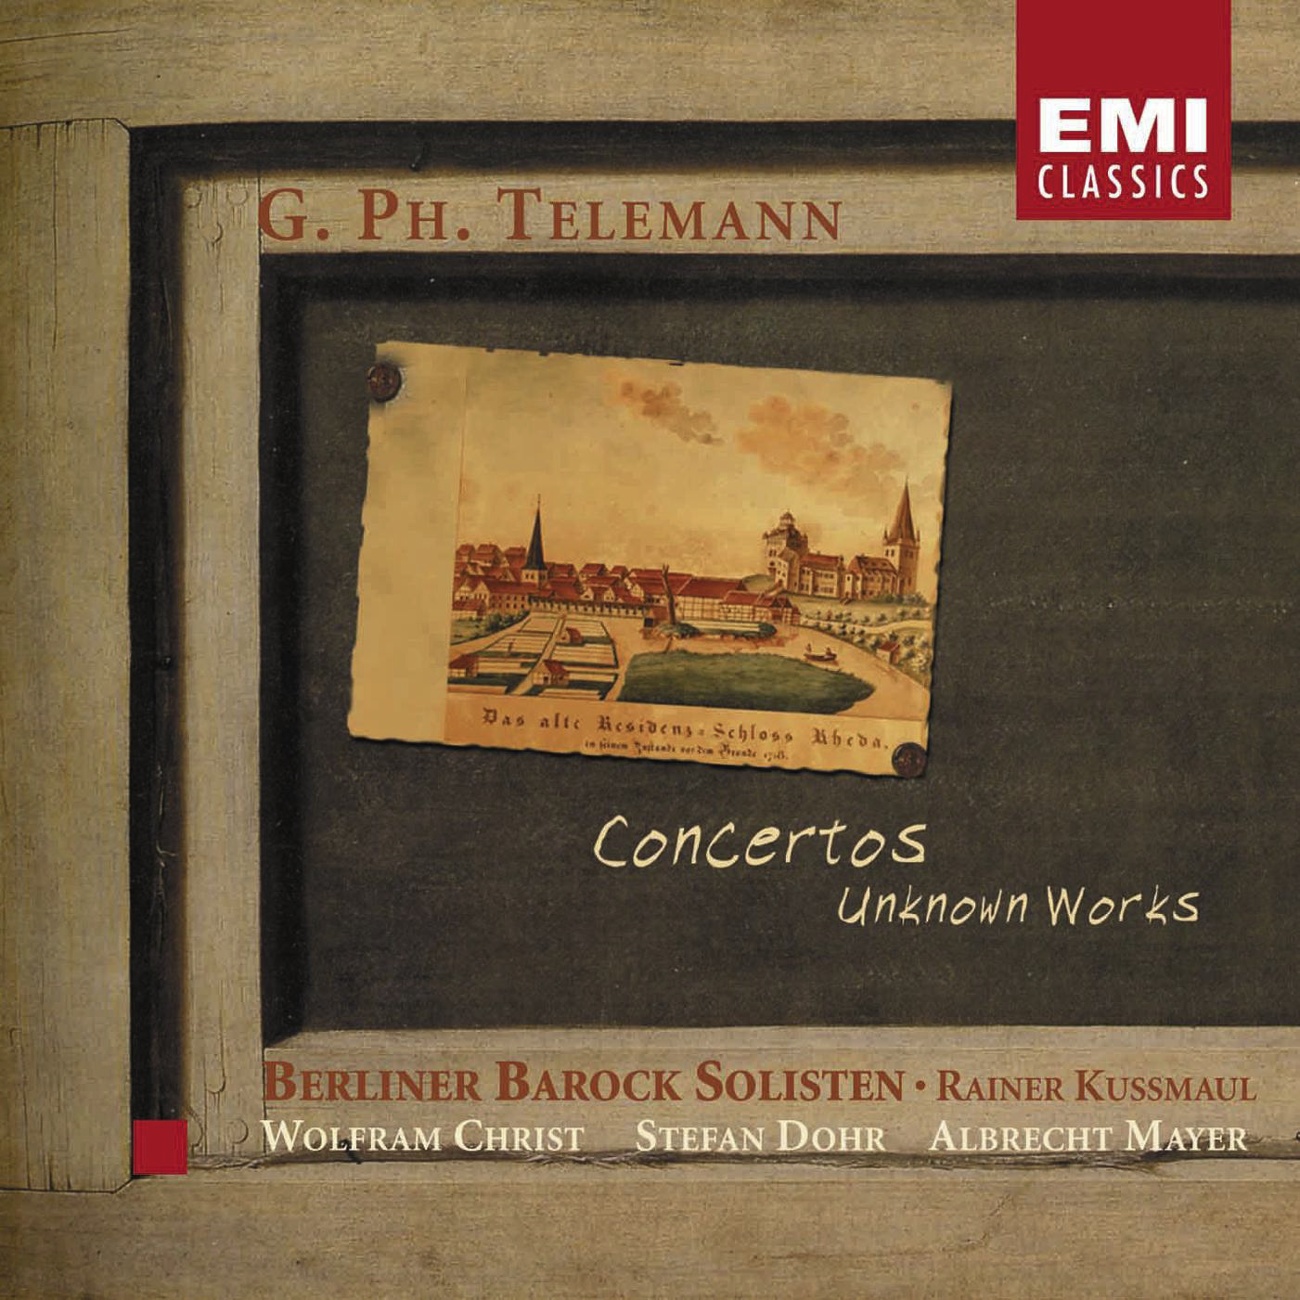 Concerto for violin, strings and basso continuo in G: Allegro